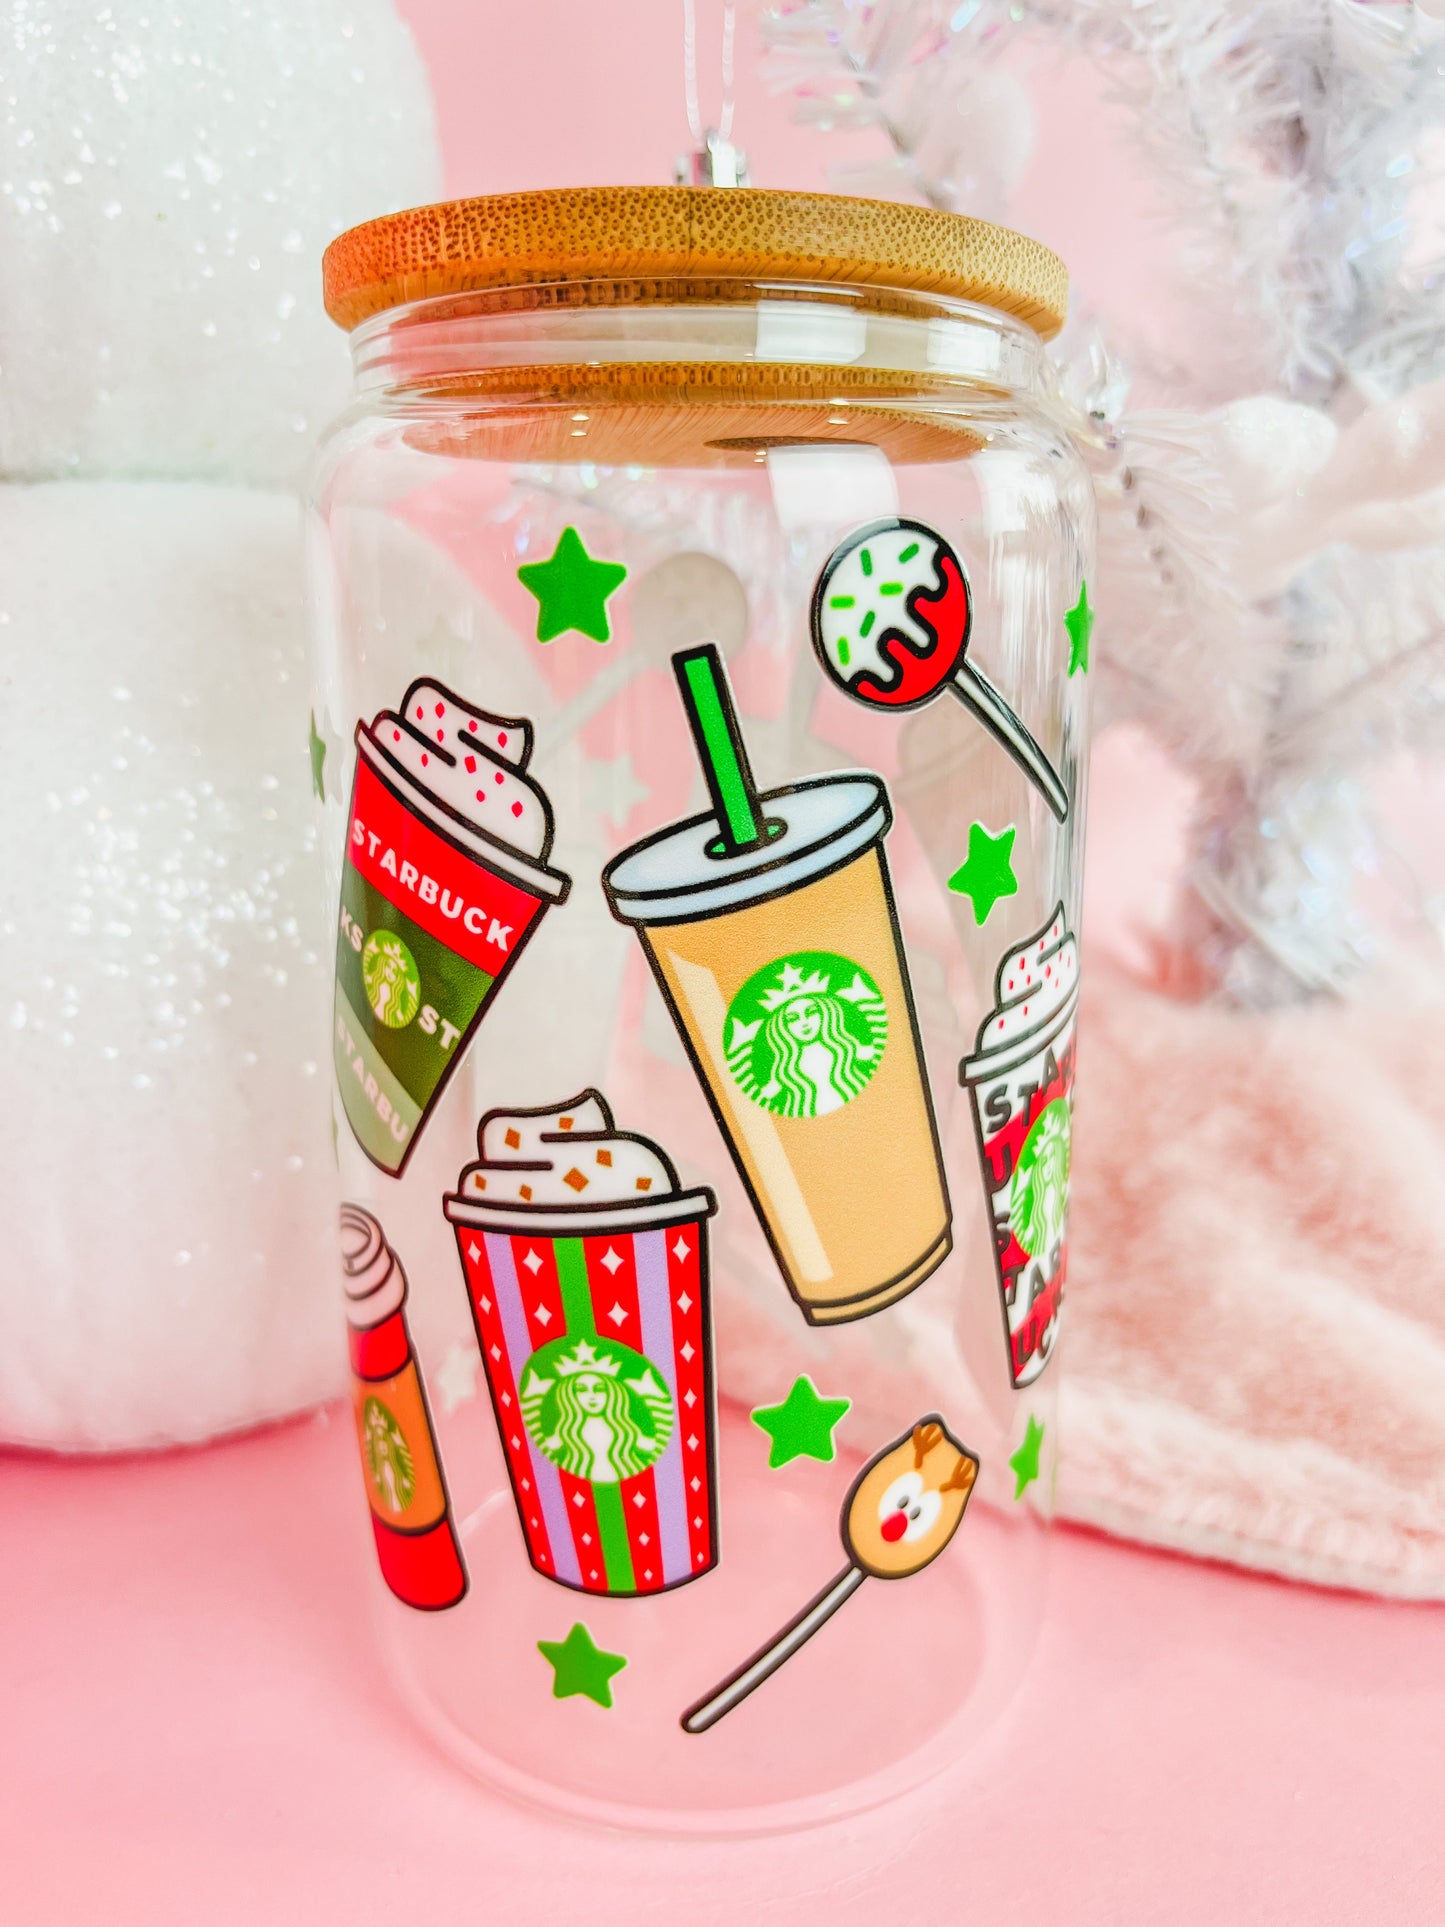 Kringle Krate Christmas Store Starbucks Inspired Coffee Lover Beer Can Glass